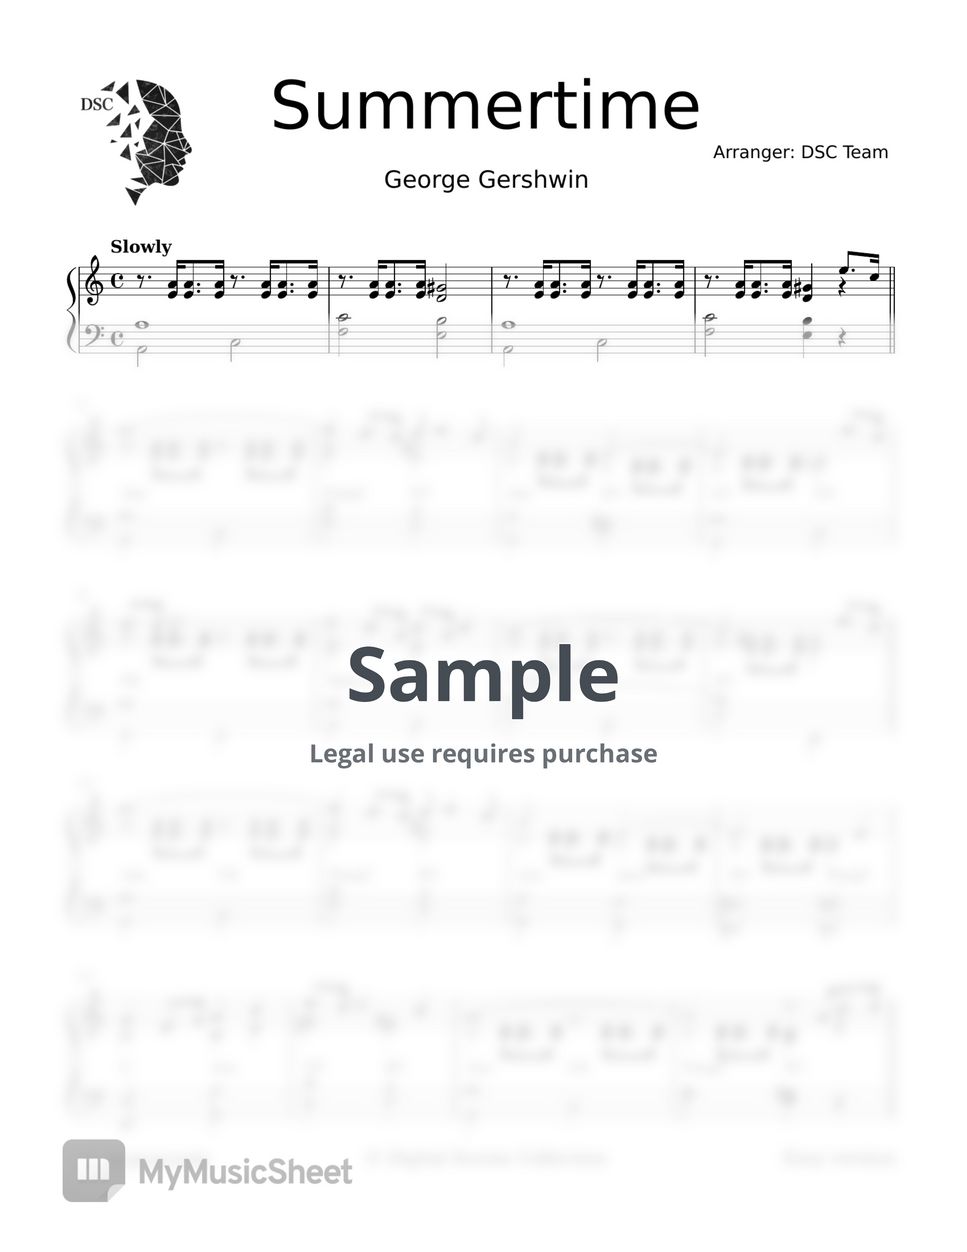 George Gershwin - Summertime by Digital Scores Collection